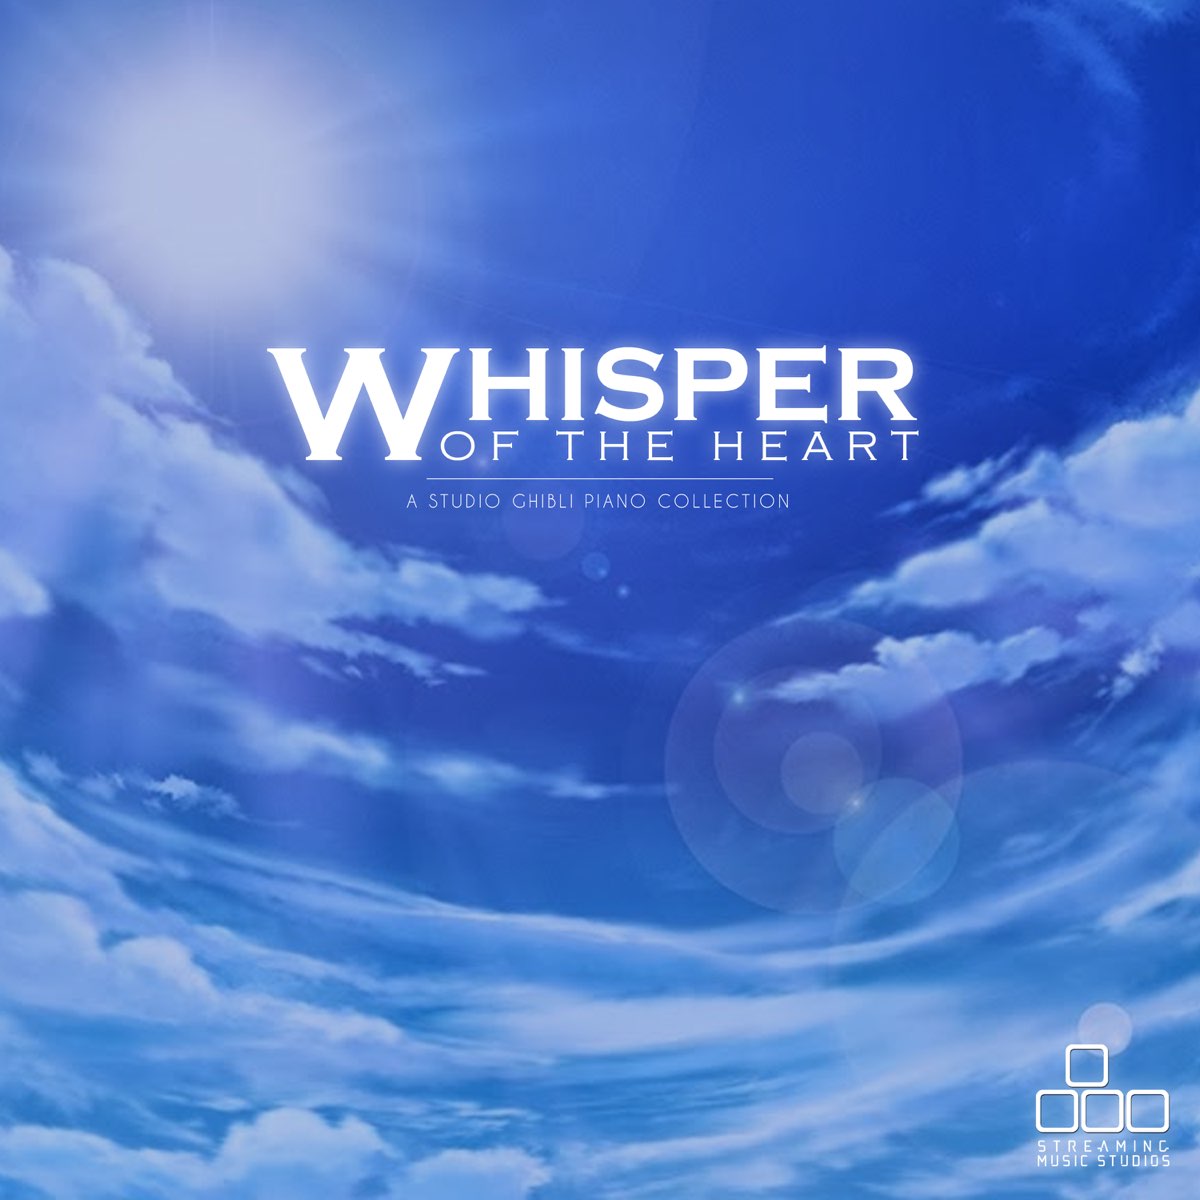 Whisper of the Heart - A Studio Ghibli Piano Collection by Streaming Music  Studios on Apple Music